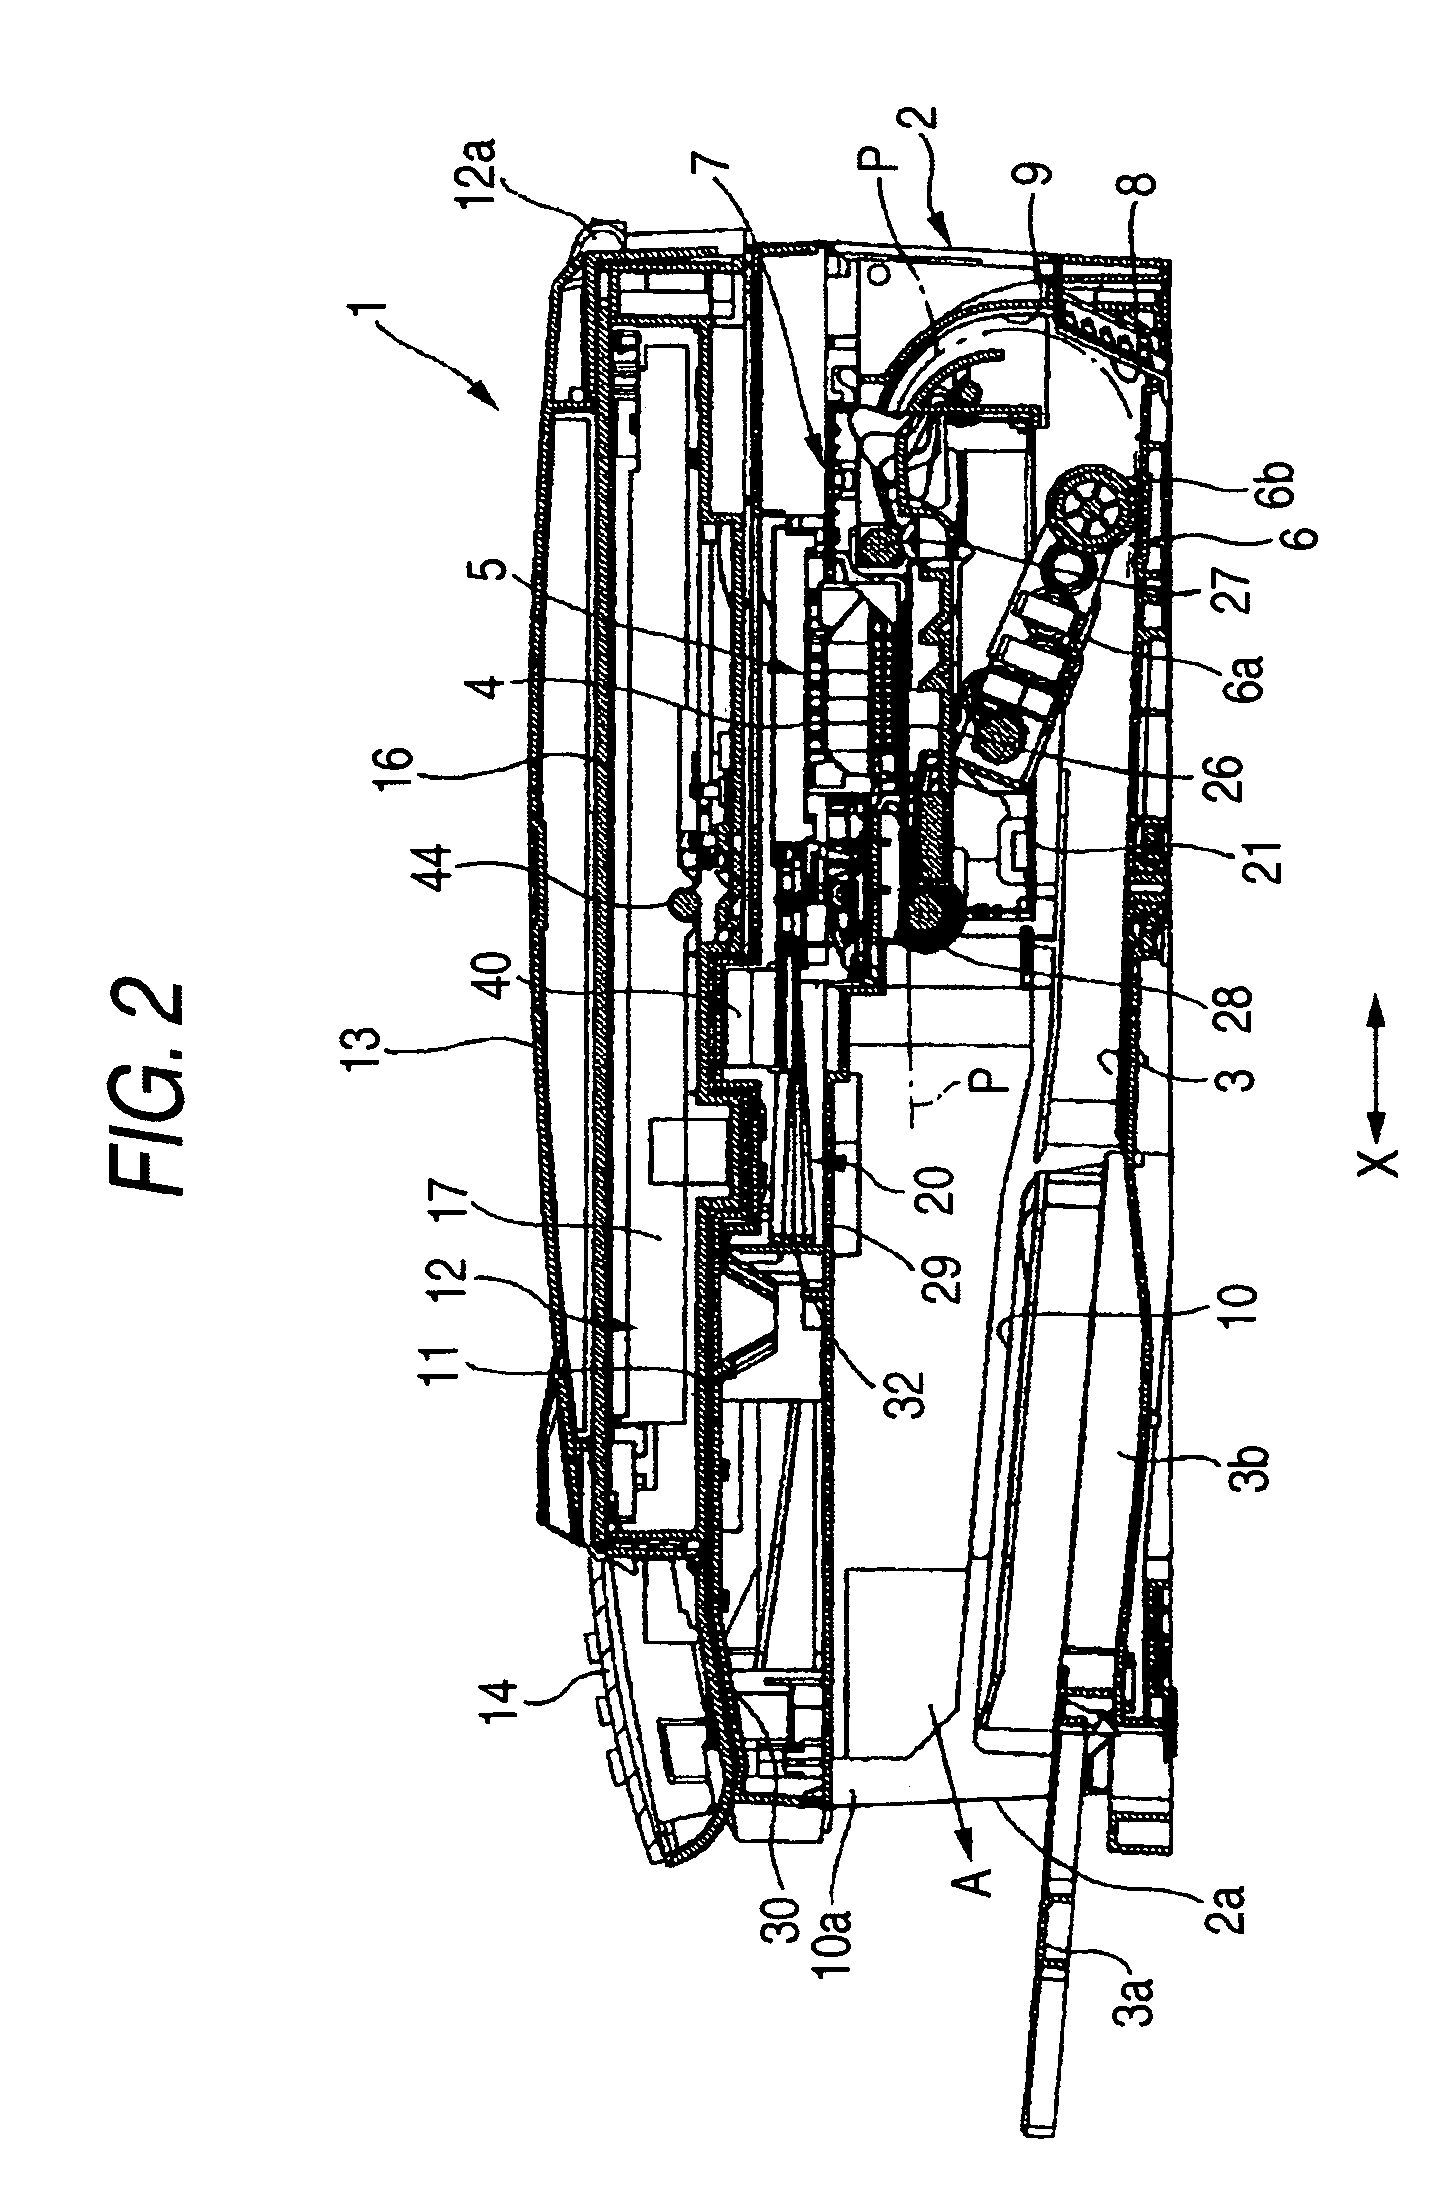 Recording medium feeder with multiple frictional surfaces and image recording device